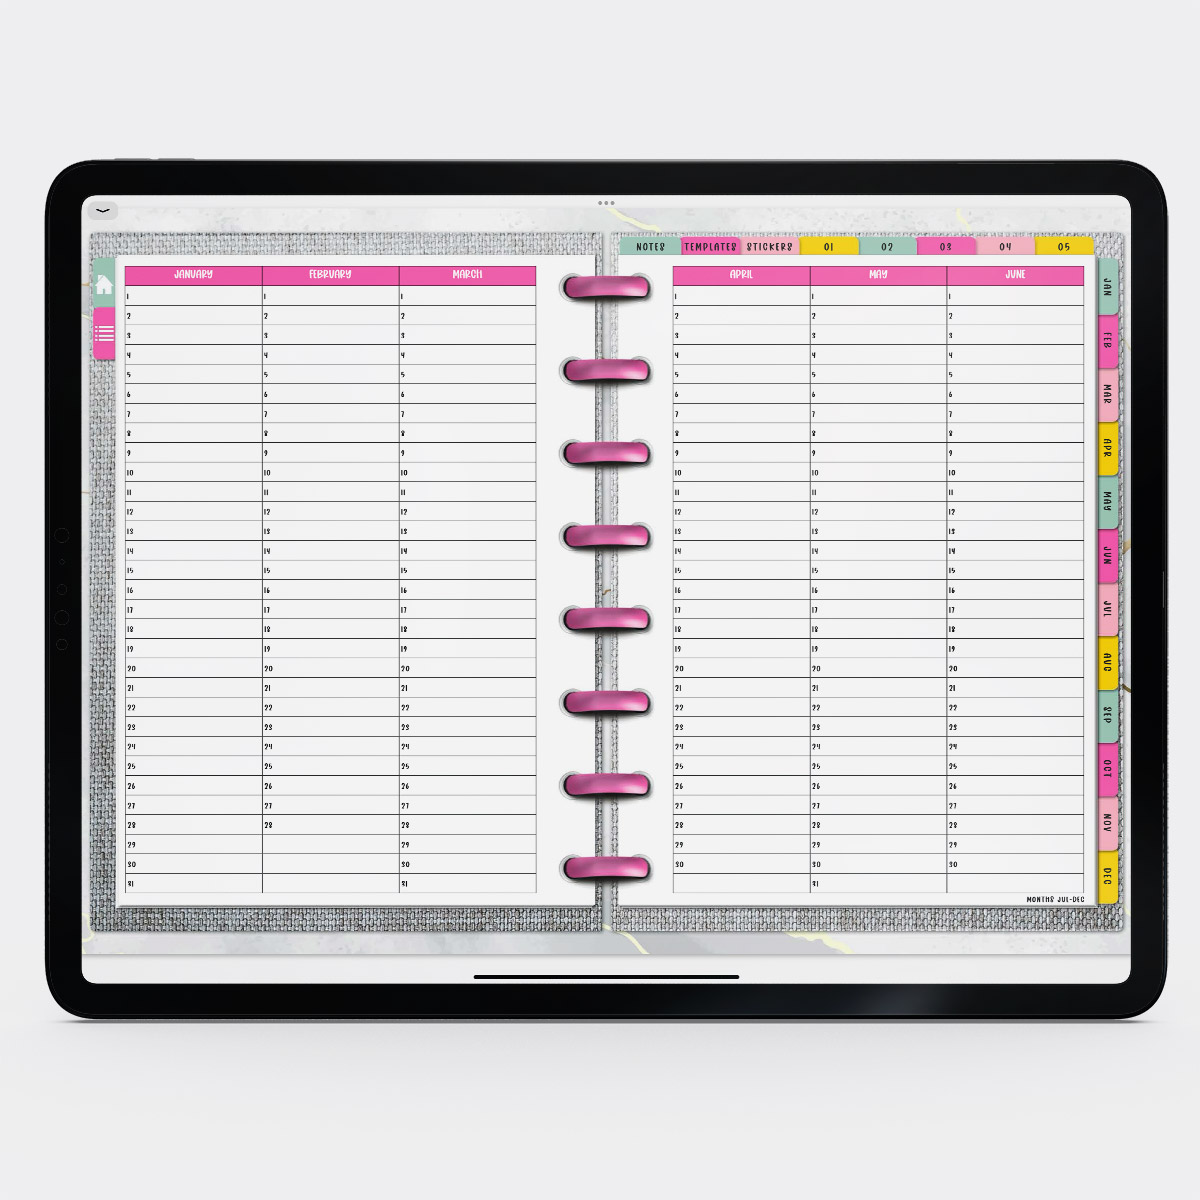 This image shows the free digital planner you can get in this post. It is open to the perpetual calendar.